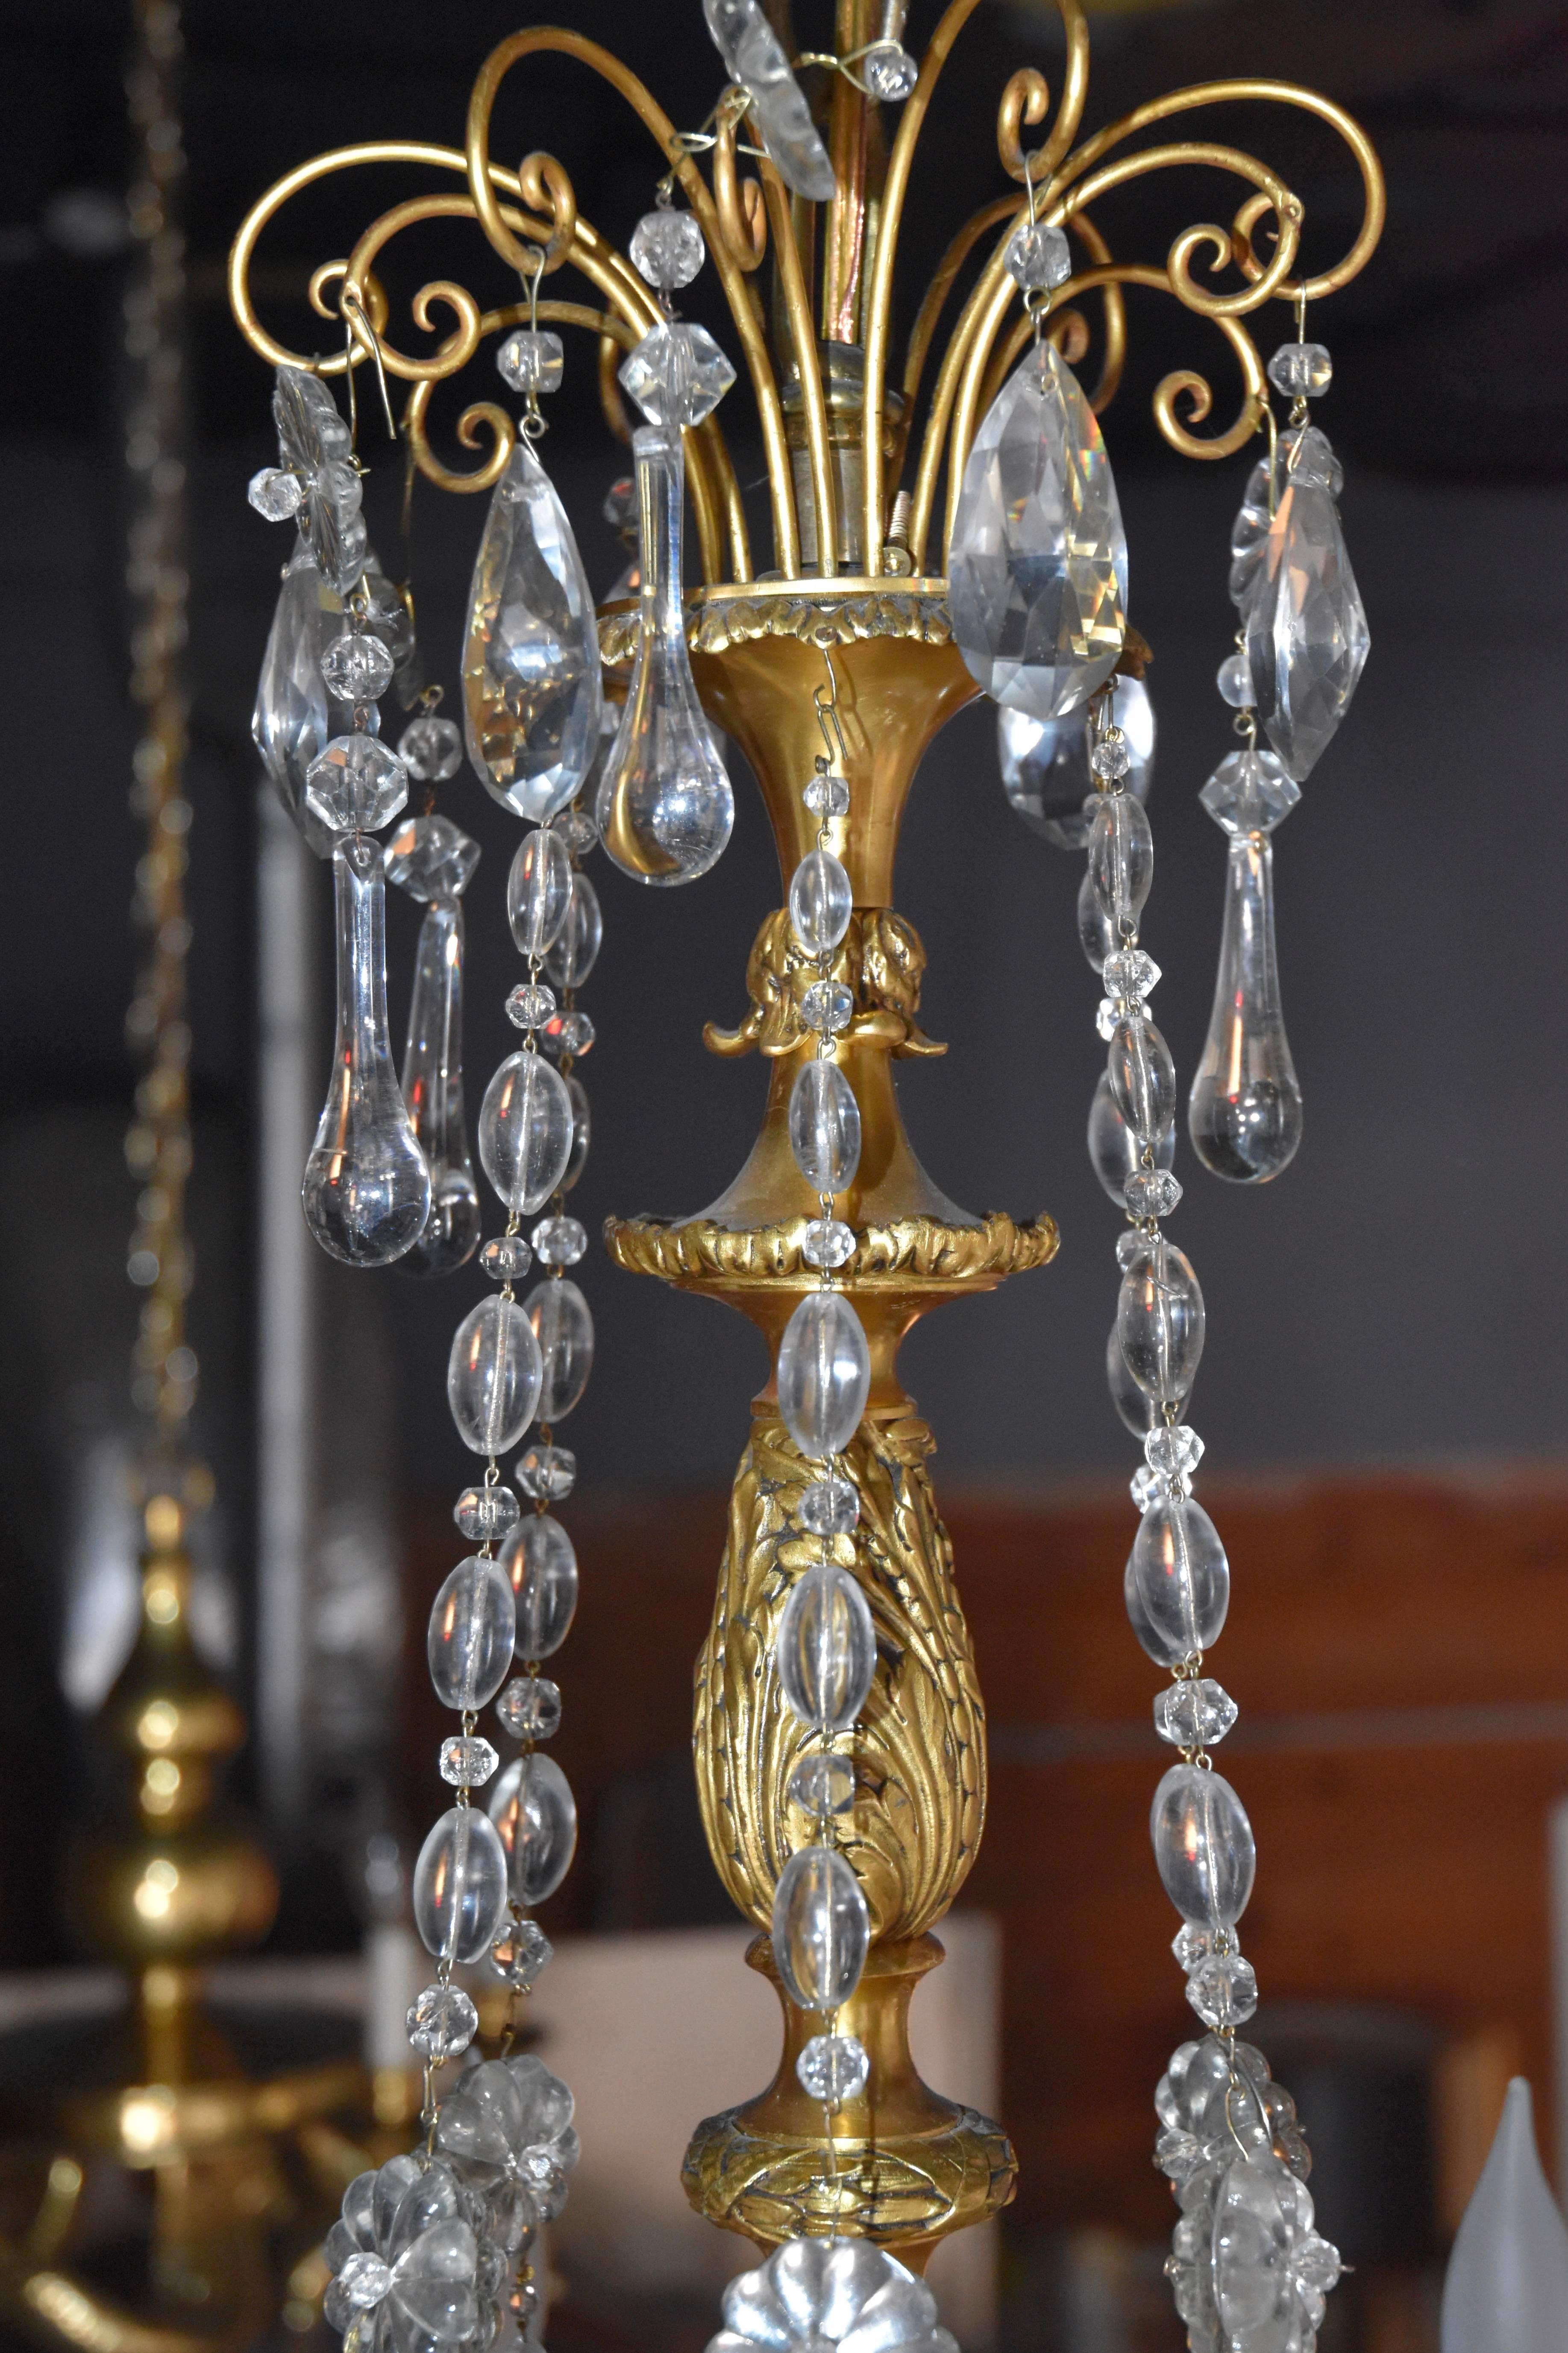 An exceptional bronze chandelier with faceted prisms and intricate bronze detailing throughout.